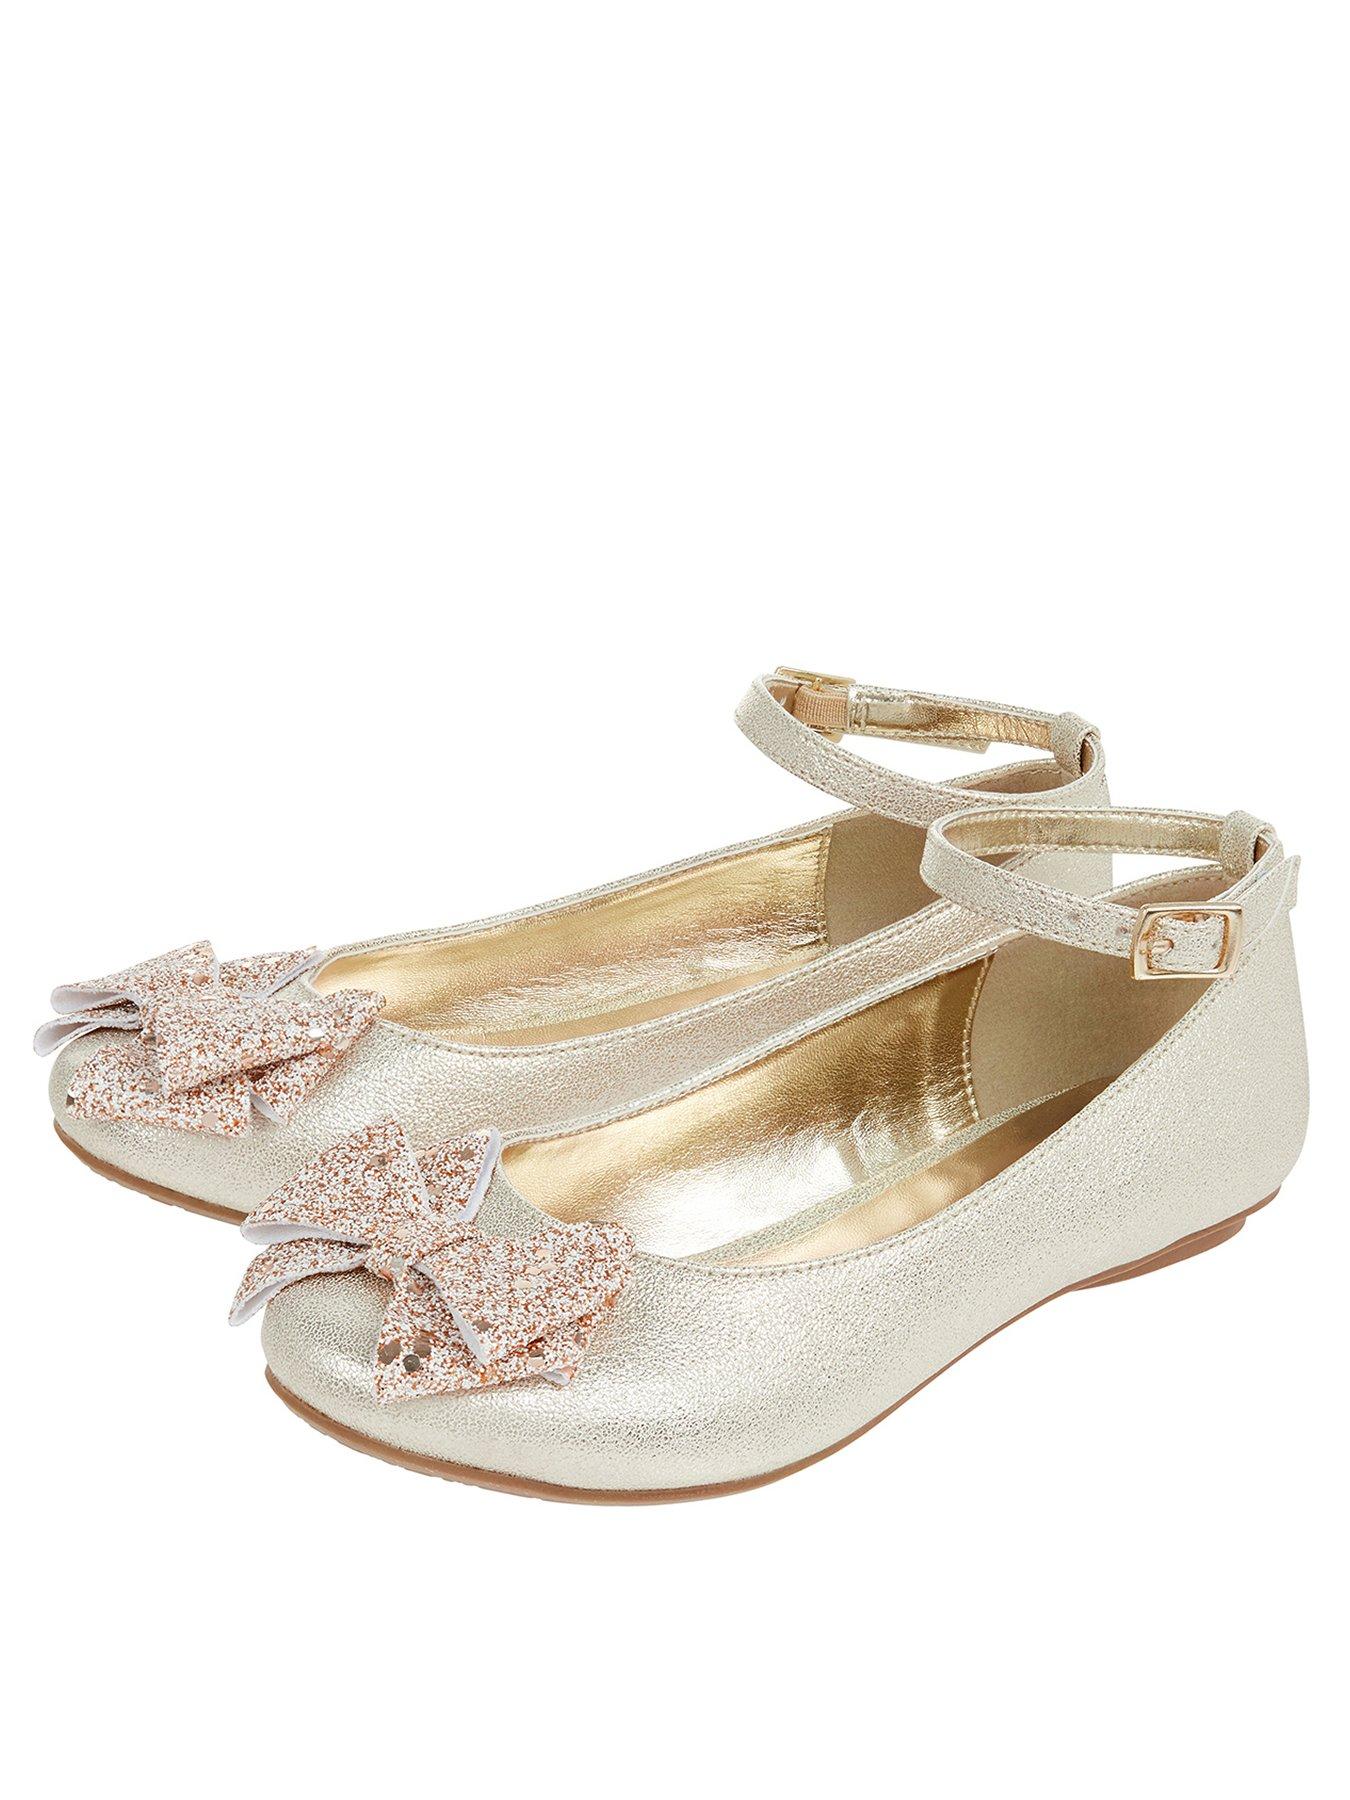 gold flat shoes for toddlers